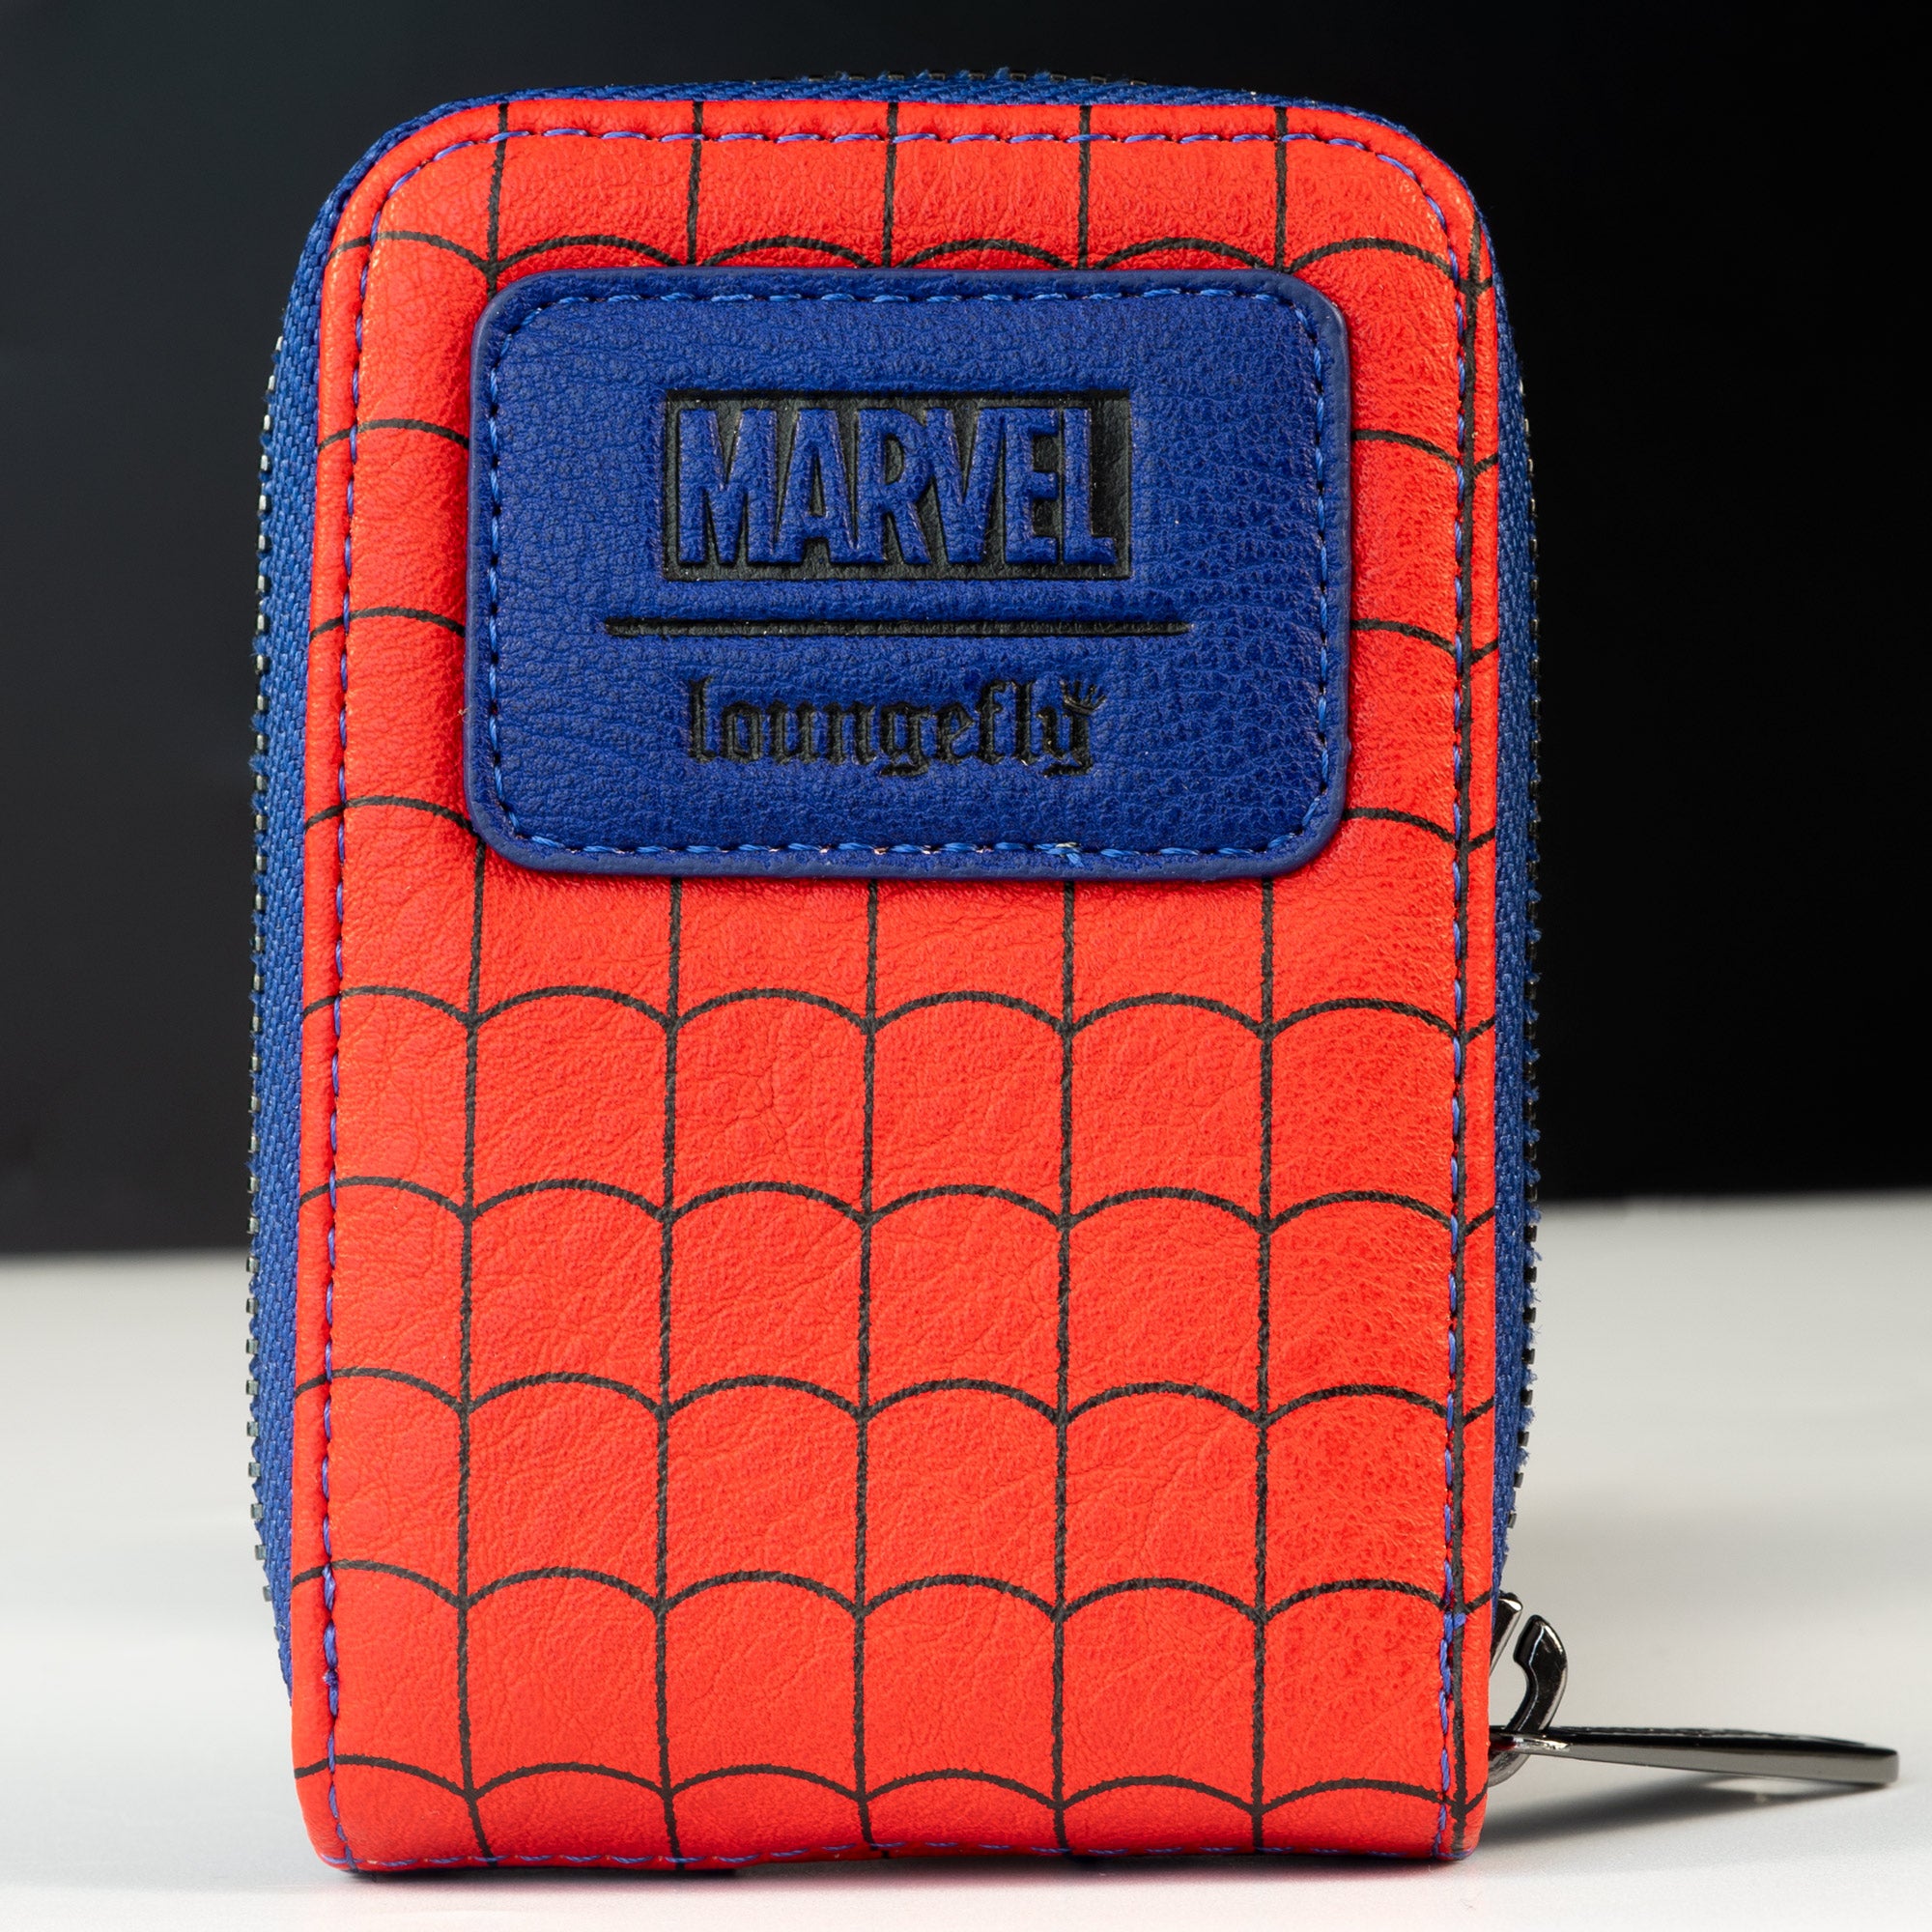 Loungefly x Marvel Spider-Man Classic Cosplay Accordion Purse